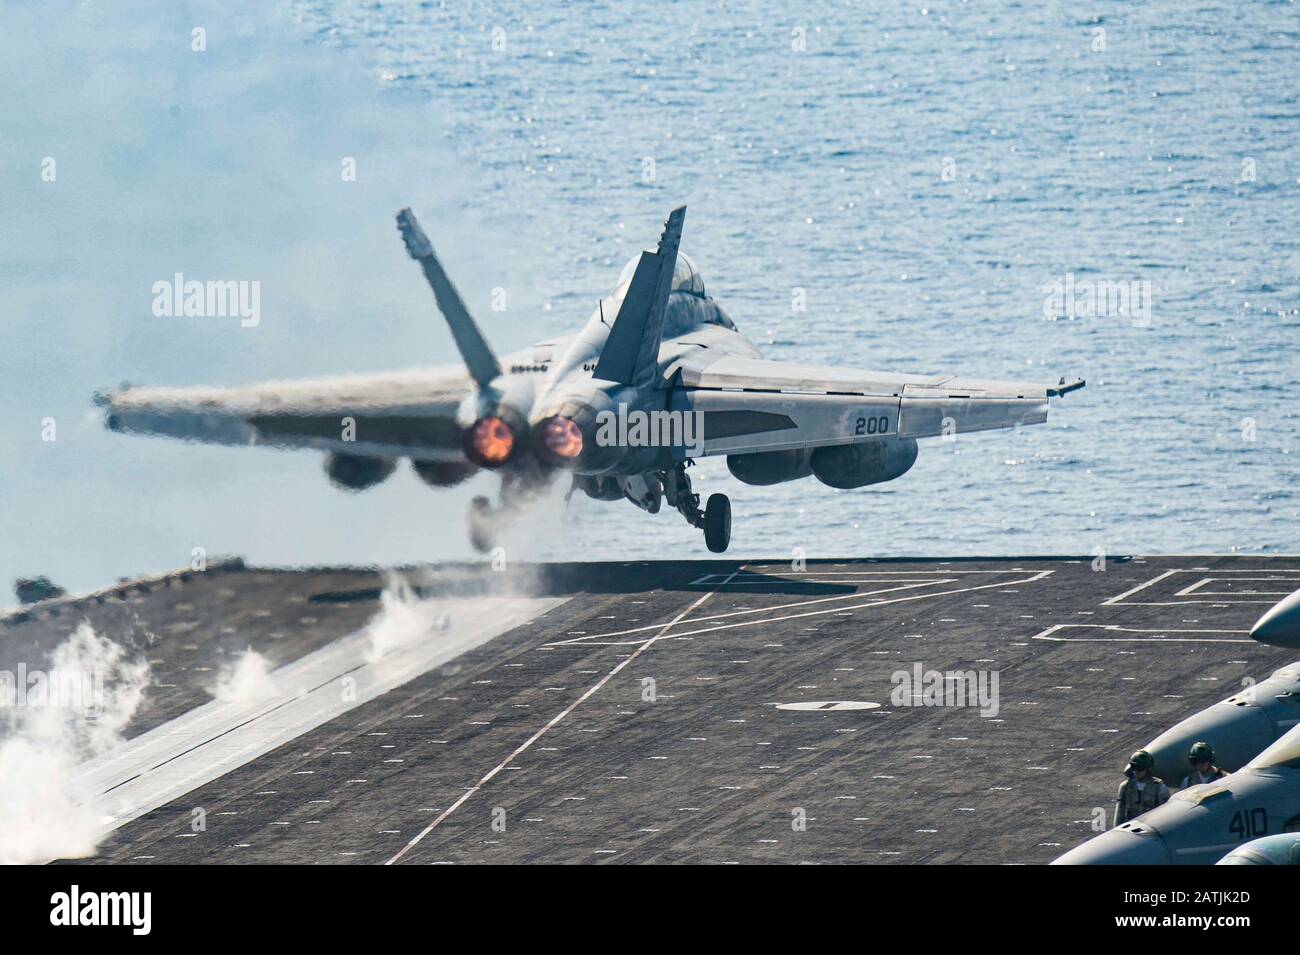 A U.S. Navy F/A-18F Super Hornet fighter aircraft attached to Strike Fighter Squadron 211, takes off from the flight deck of the aircraft carrier USS Harry S. Truman following a routine patrol January 9, 2020 in the Arabian Sea. Stock Photo